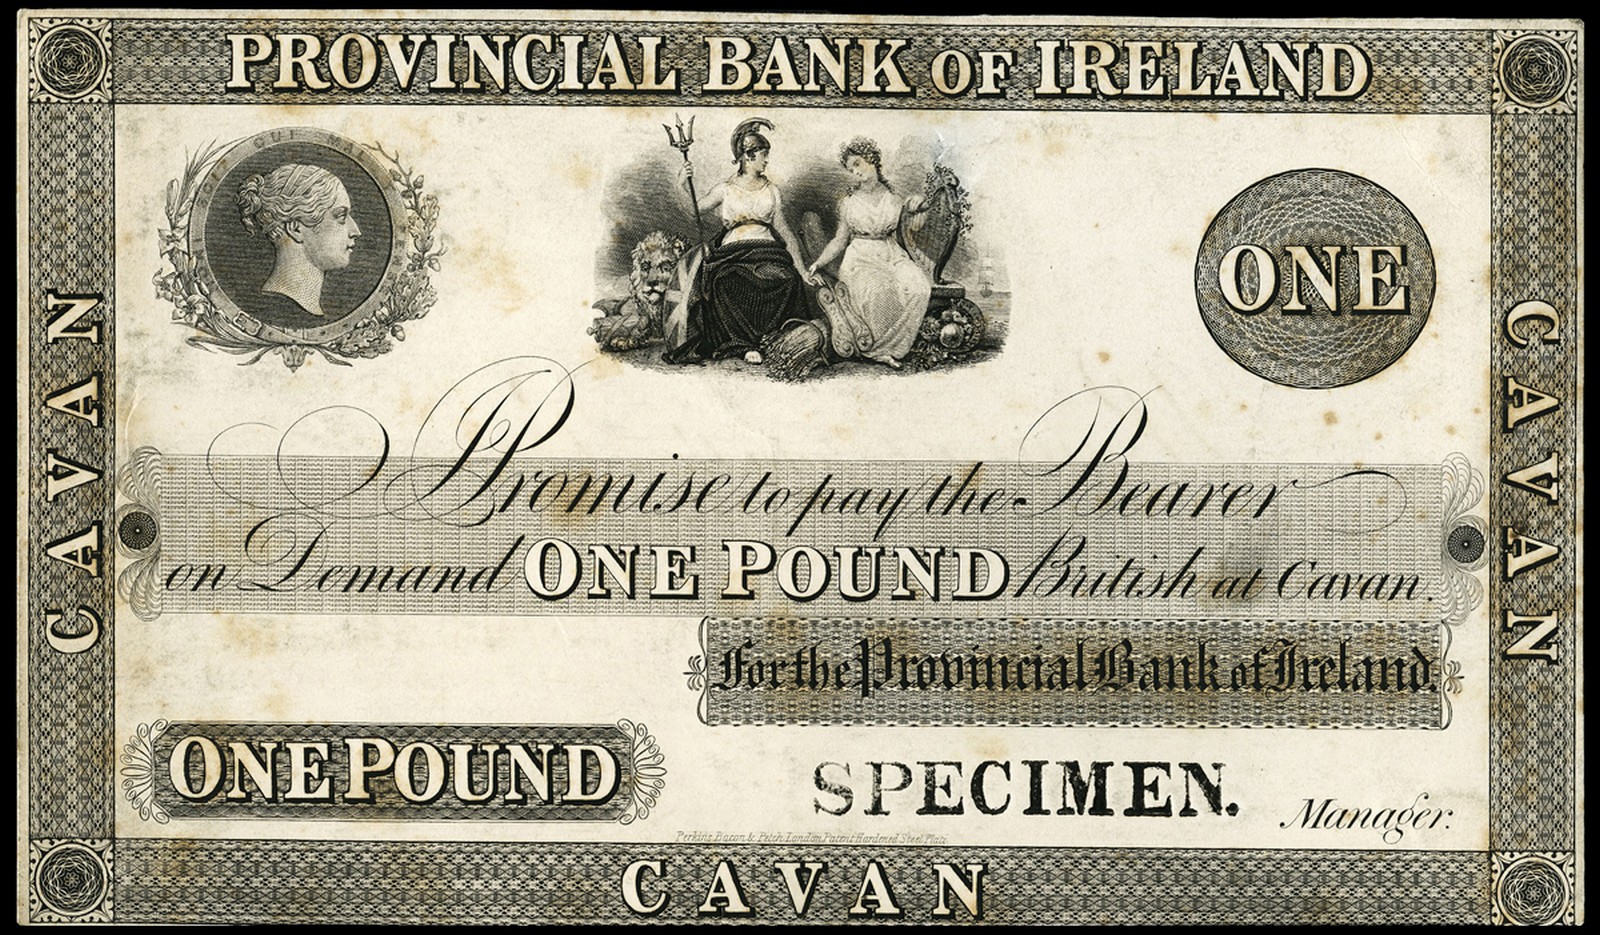 BRITISH BANKNOTES, Provincial Bank of Ireland, One Pound, Cavan, uniface proof on card, stamped